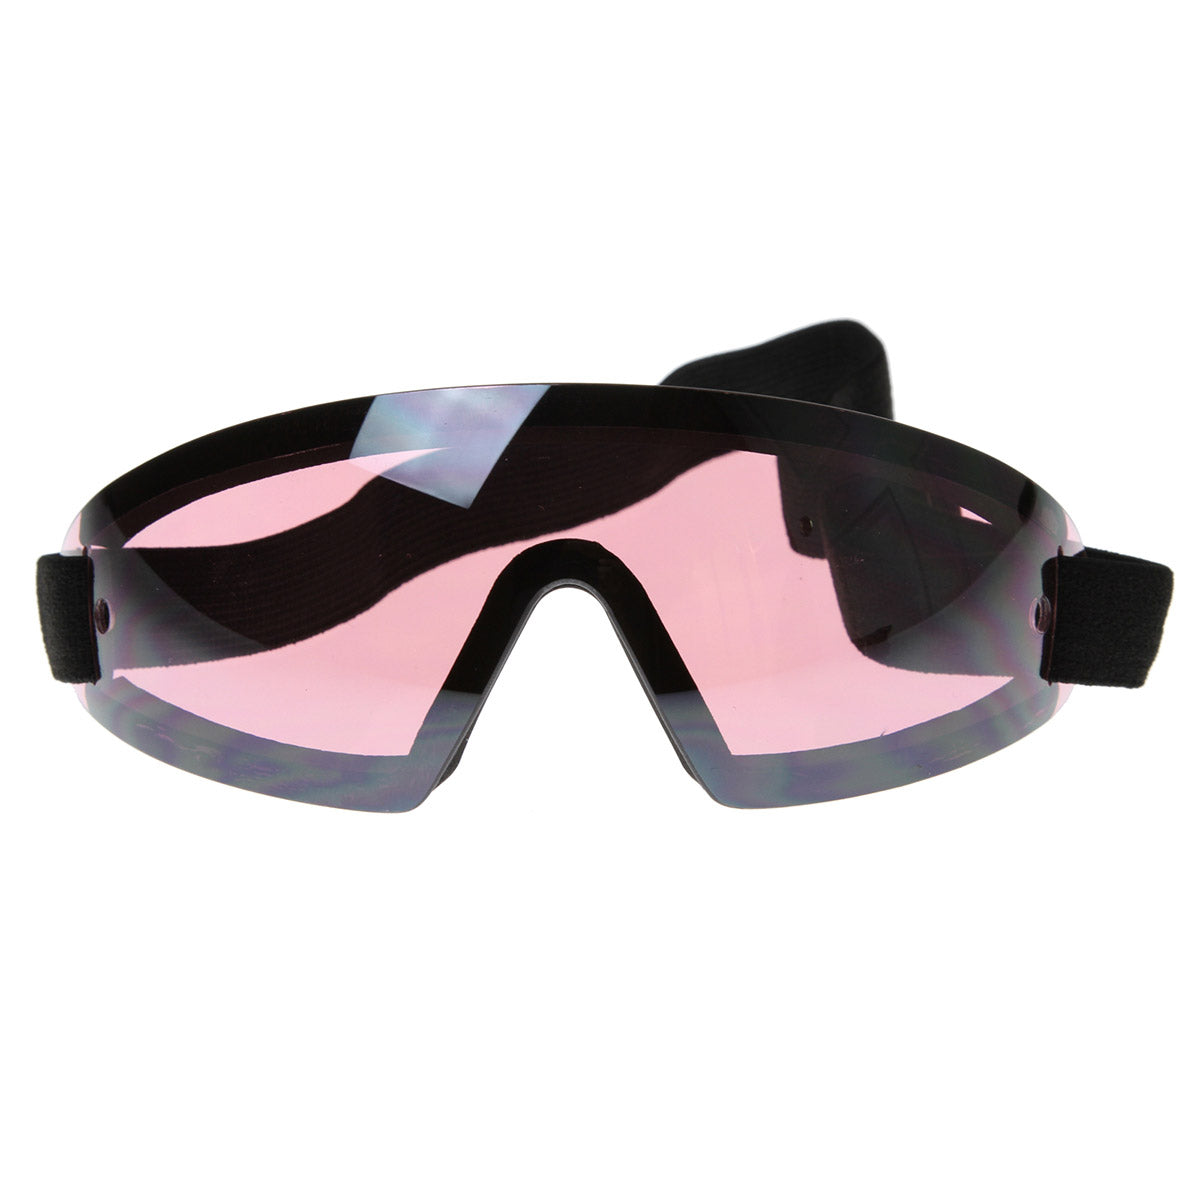  3 Pair Motorcycle Riding Glasses Padding Goggles UV Protection  Dustproof WindproofMotorcycle Sunglasses with Pink Lens for Outdoor sports  Actives : Automotive